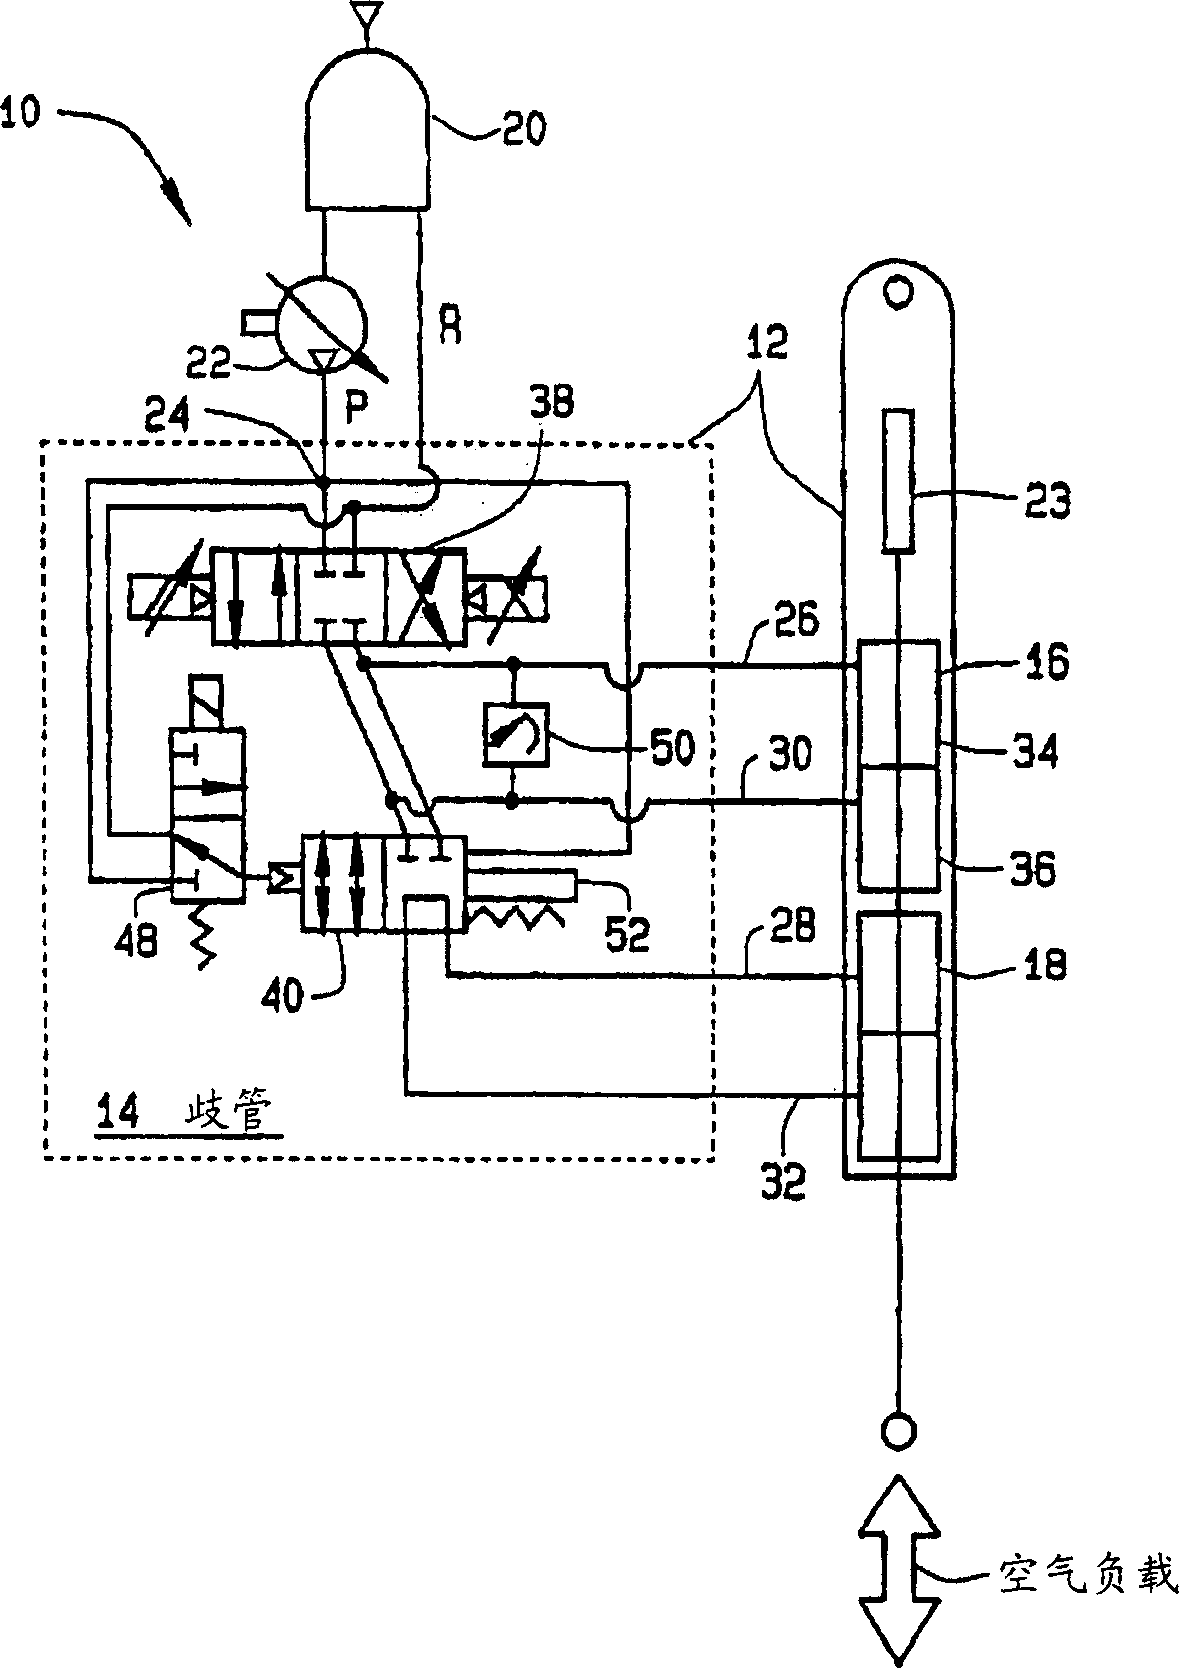 Augmenting flight control surface actuation system and method